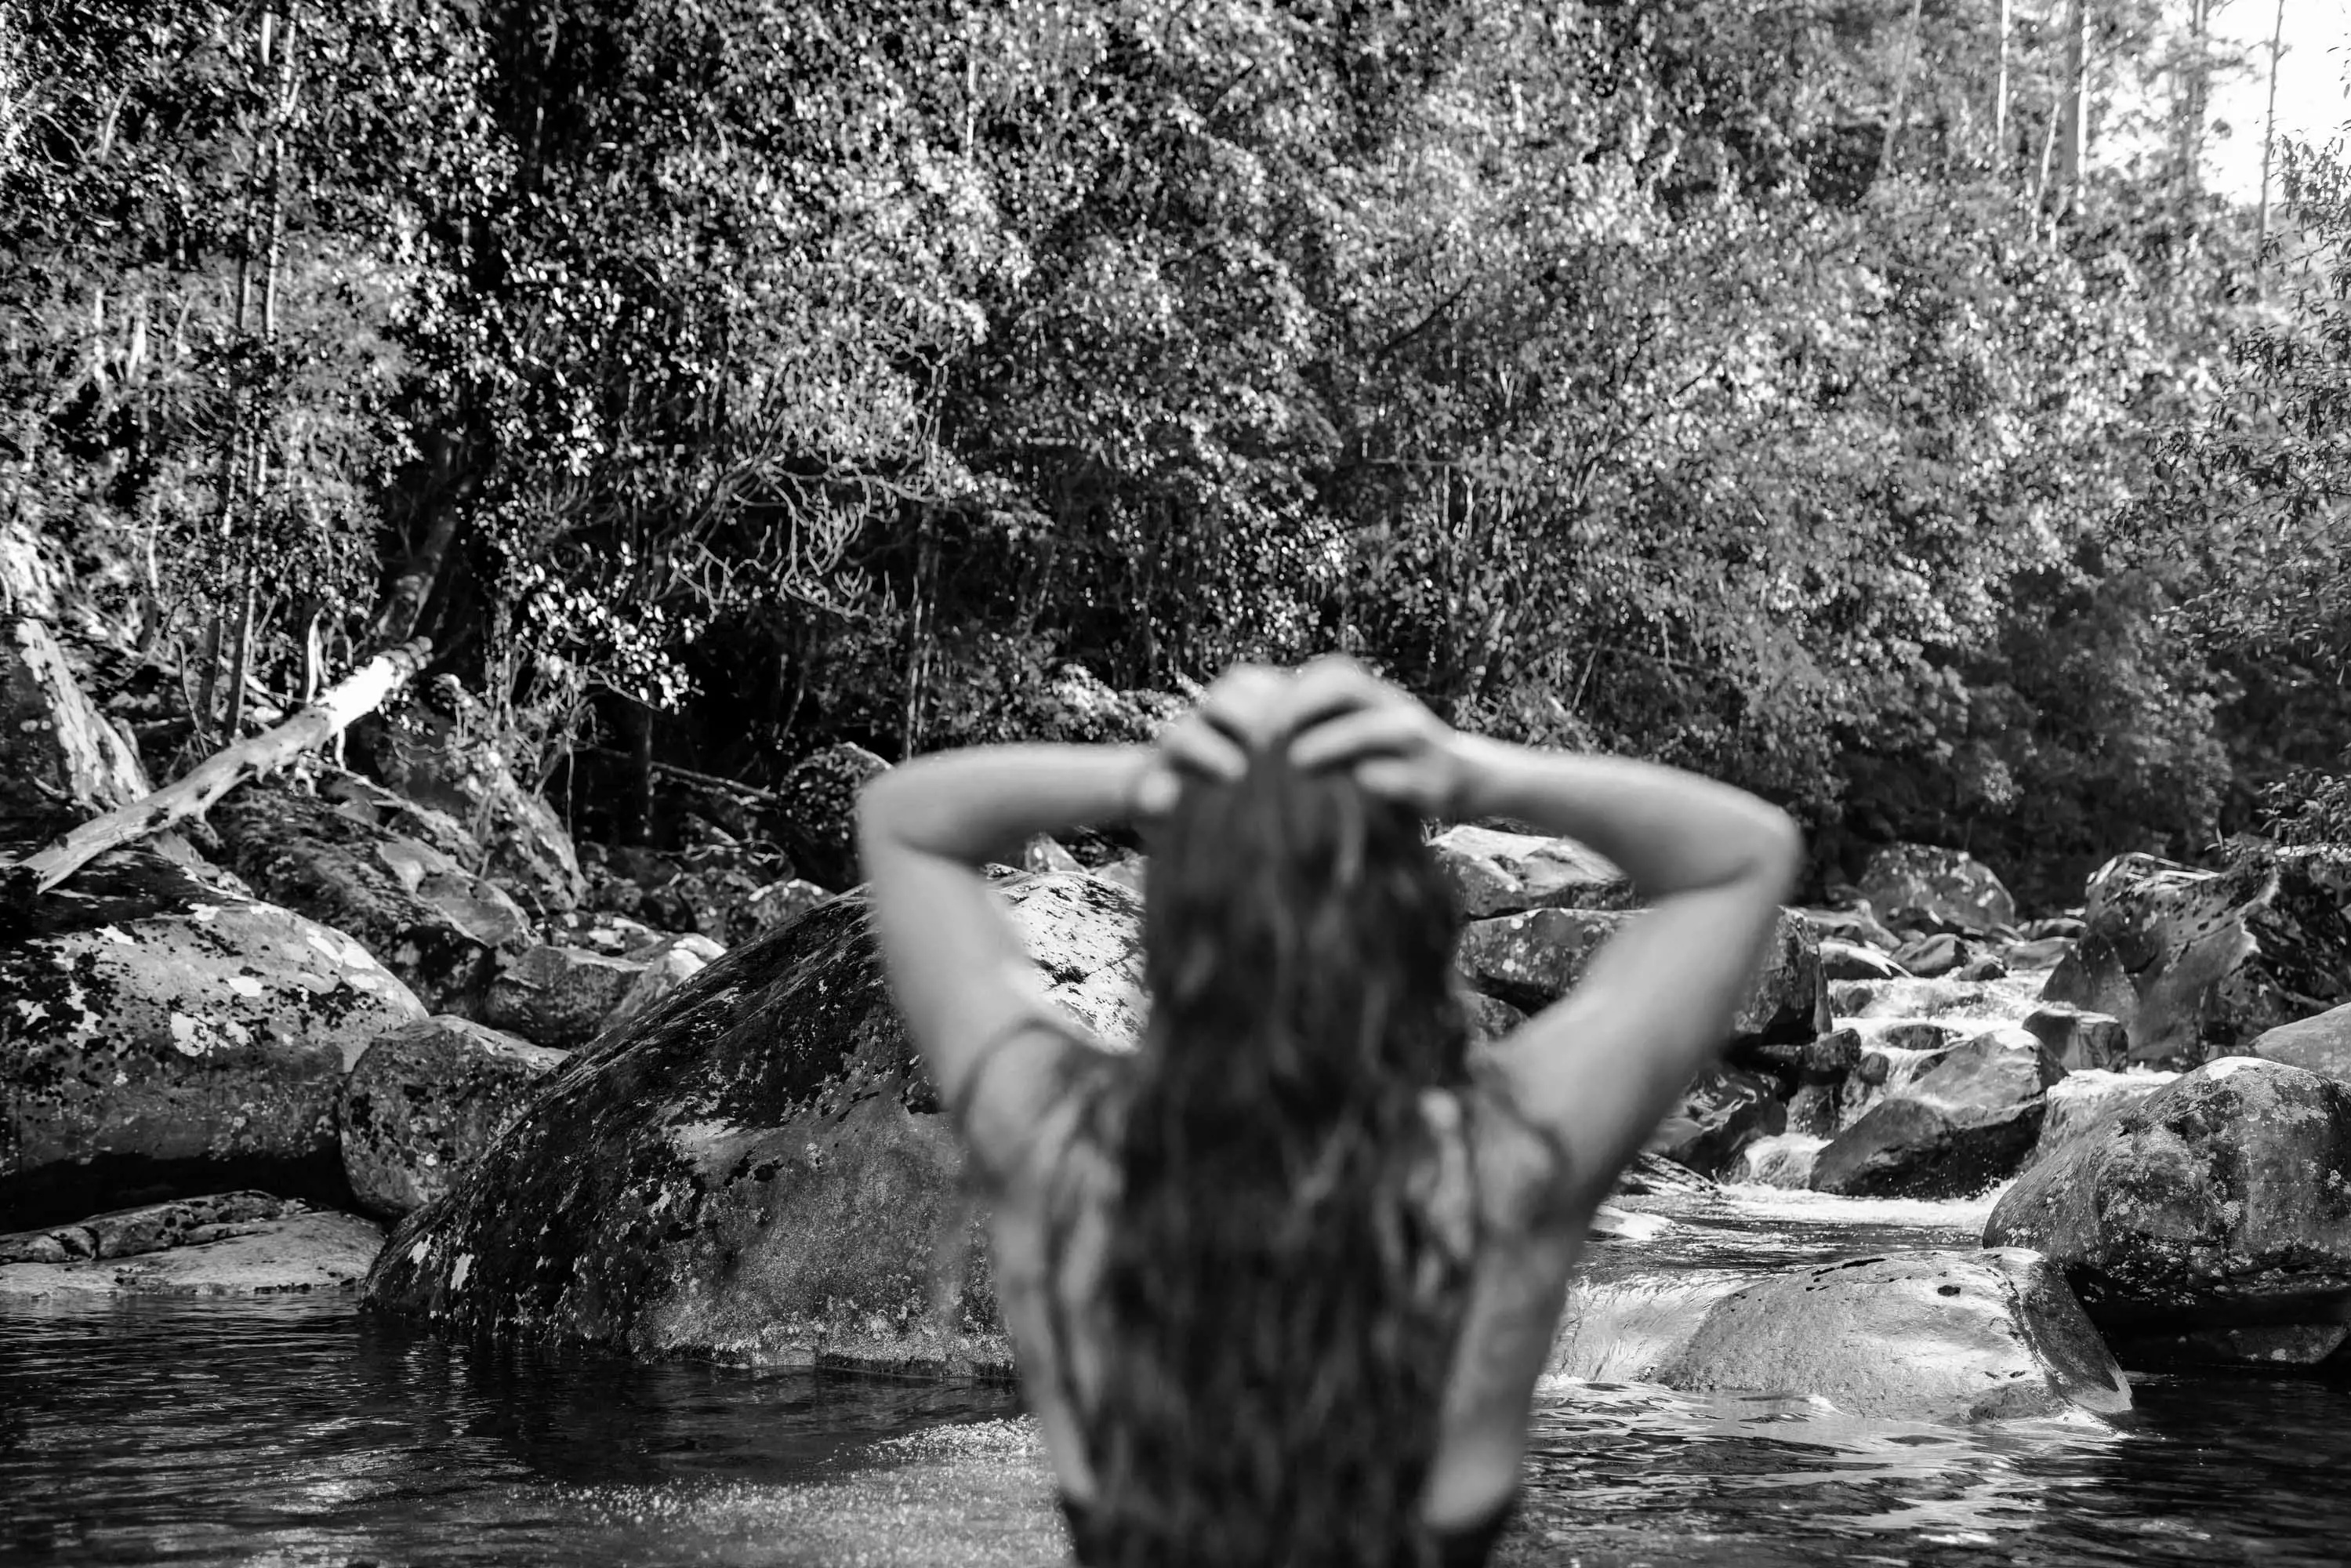 A young woman stands in rocky waterhole within a dense forest.